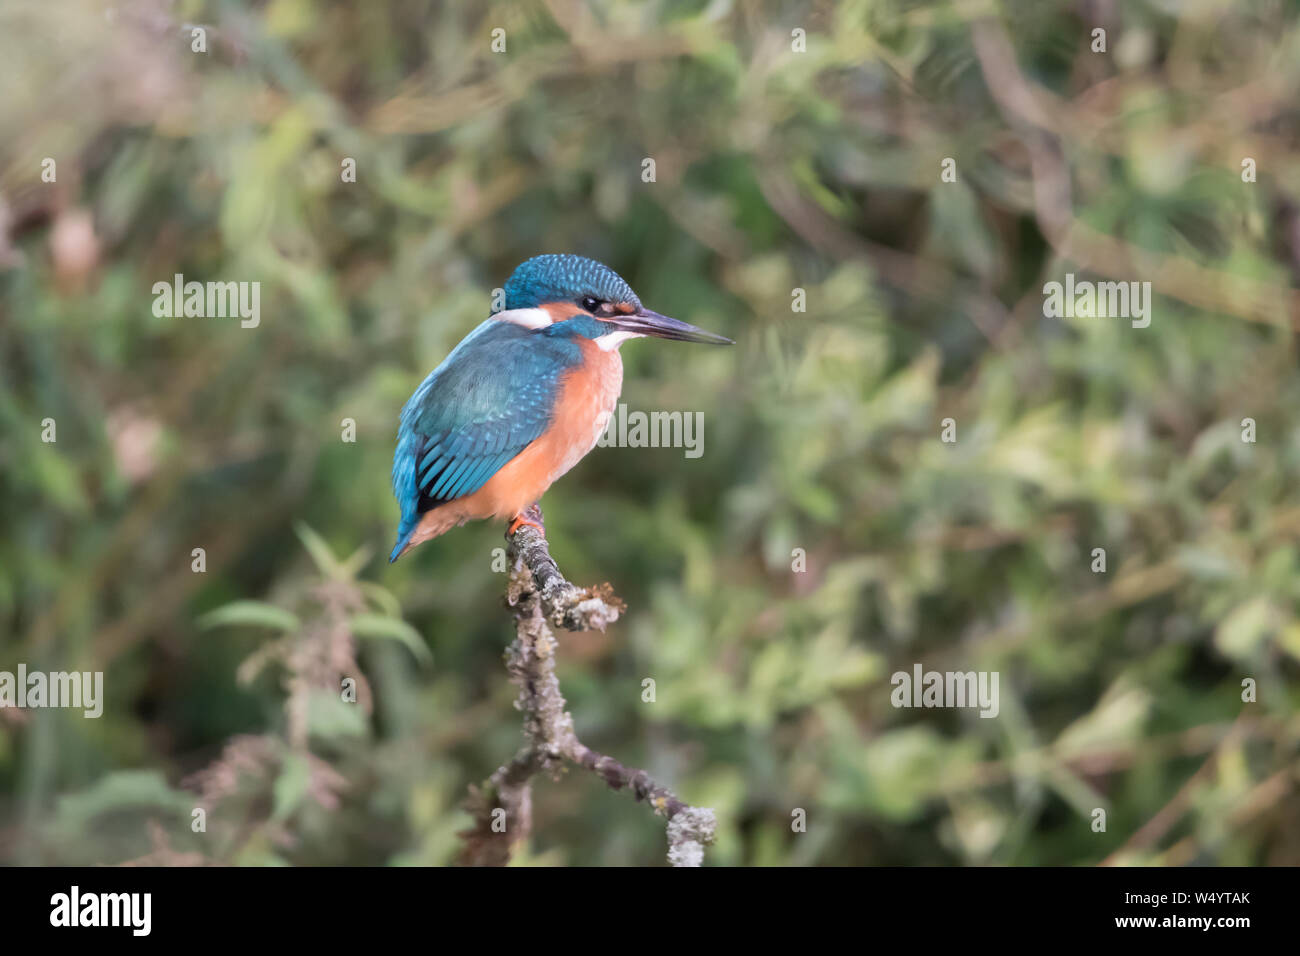 A king fisher bird snaps for a fish Stock Photo